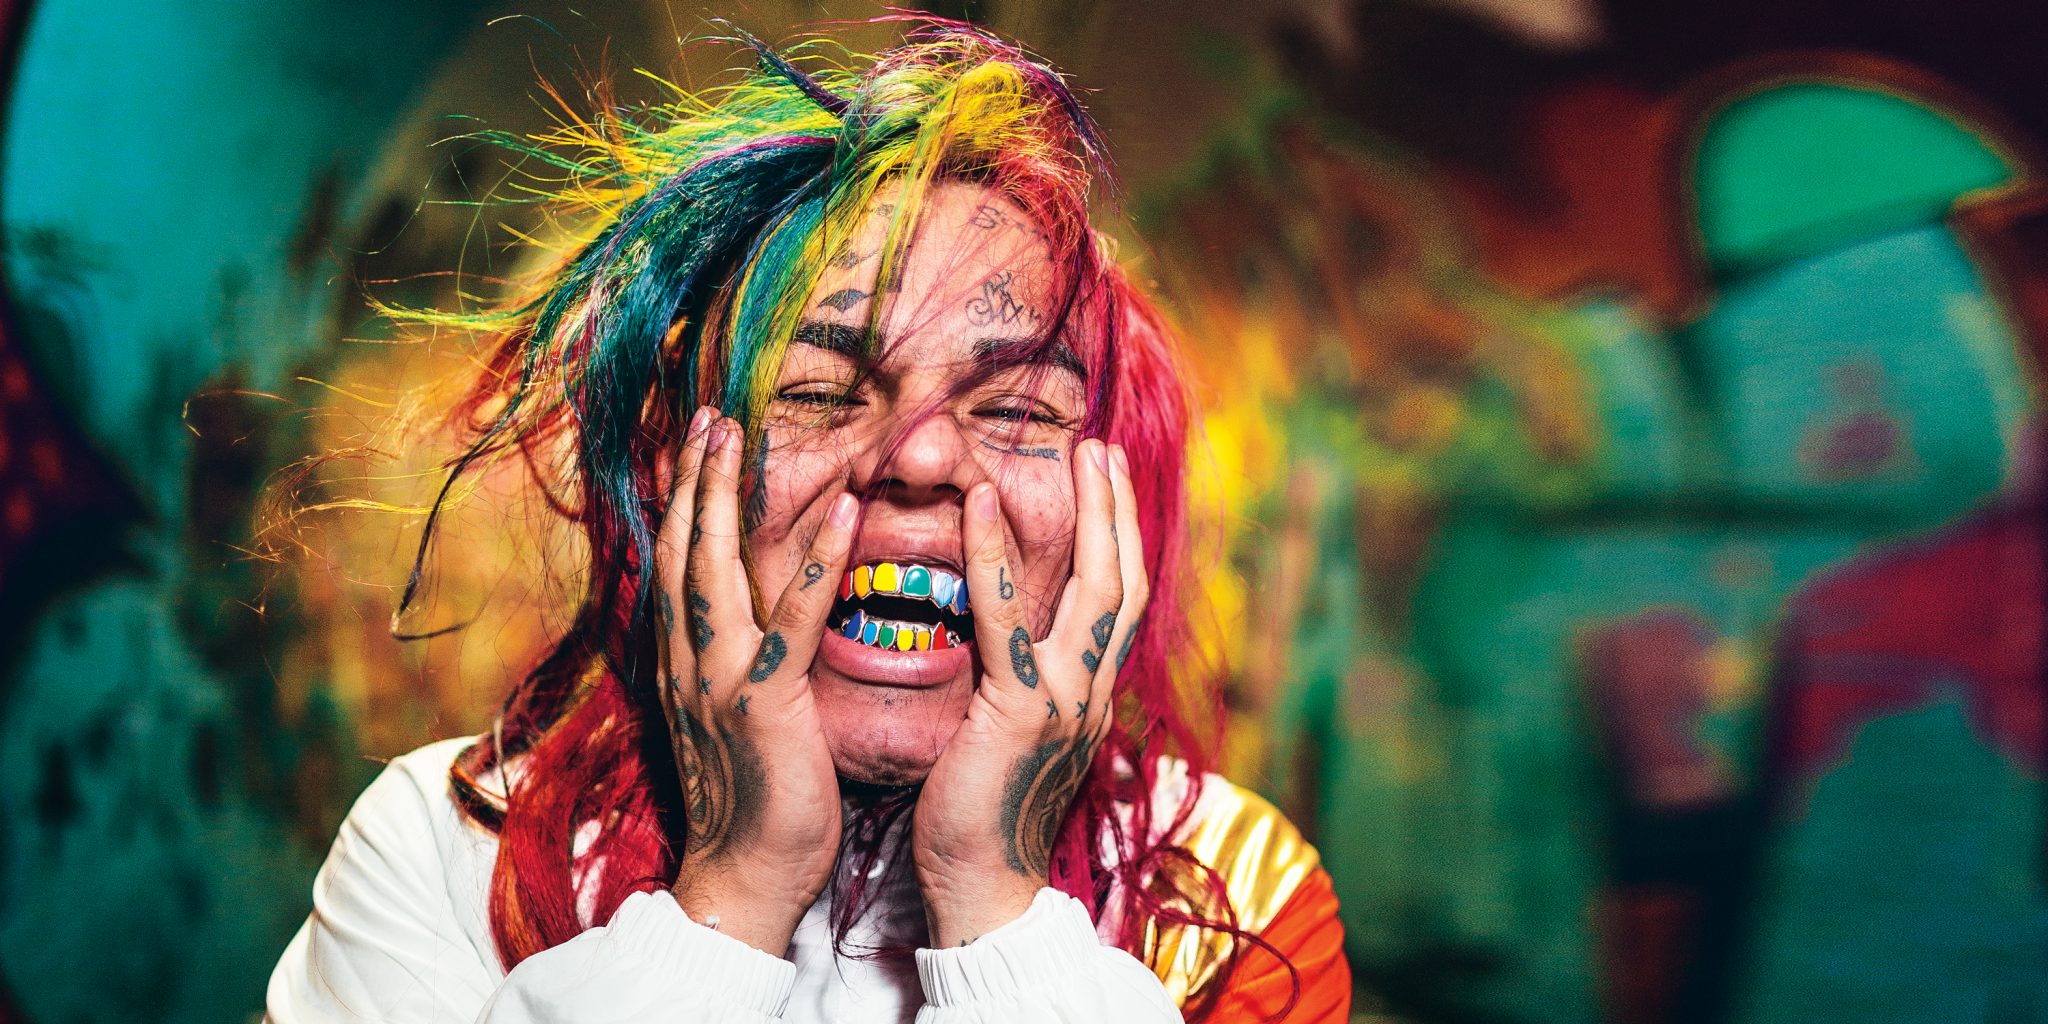 6ix9ine Out of Prison; Out With New Song. Listen HOME